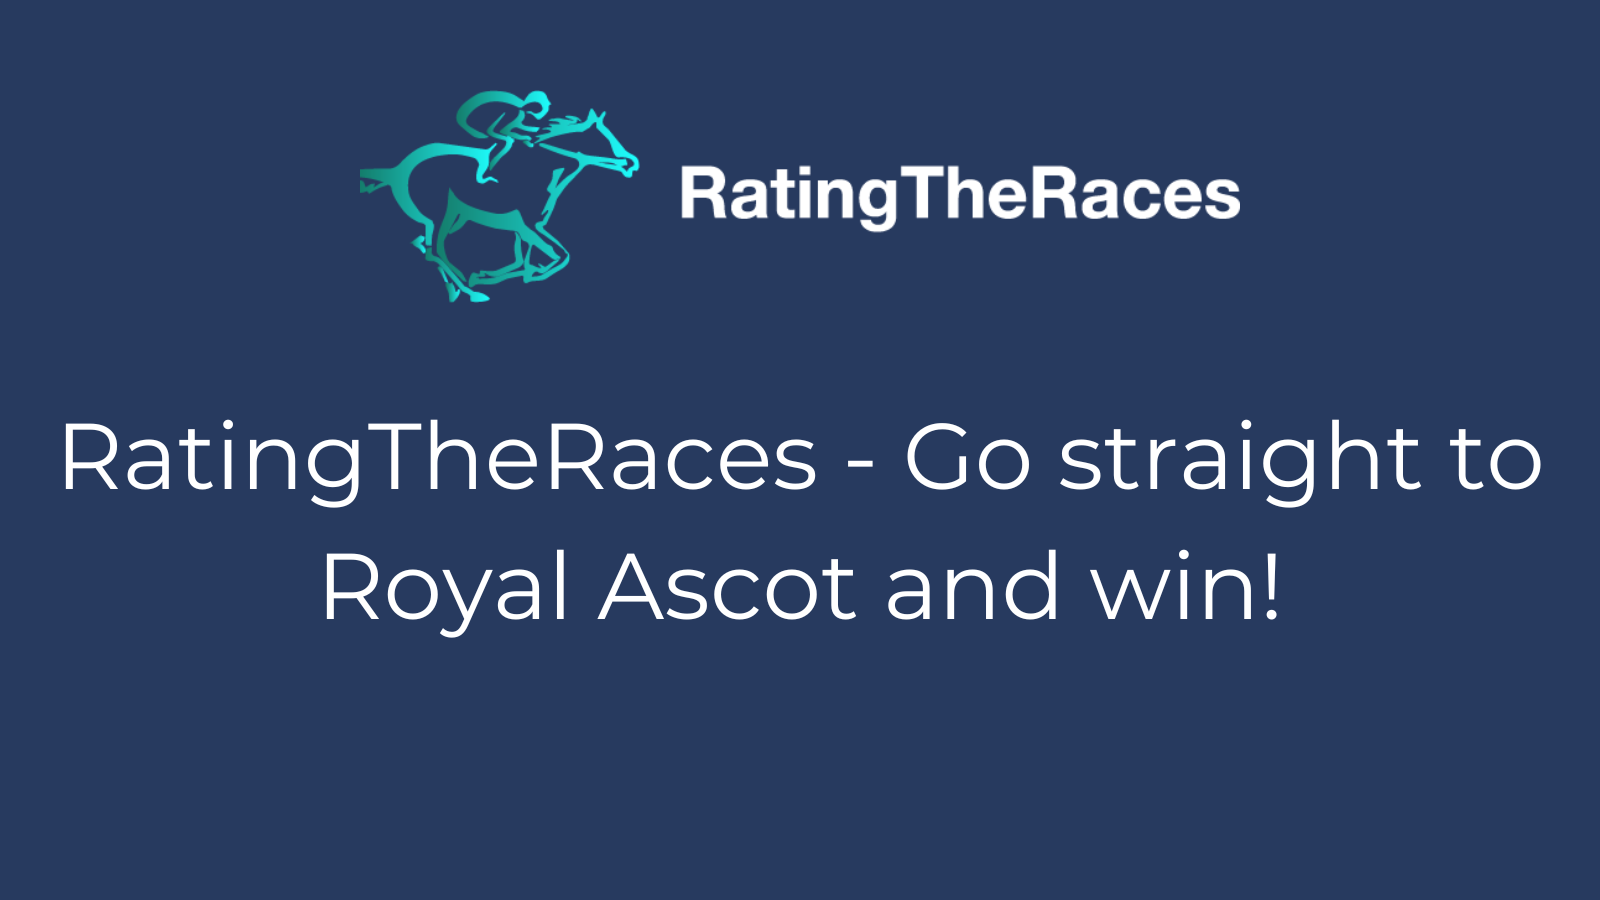 Go straight to Royal Ascot & win!